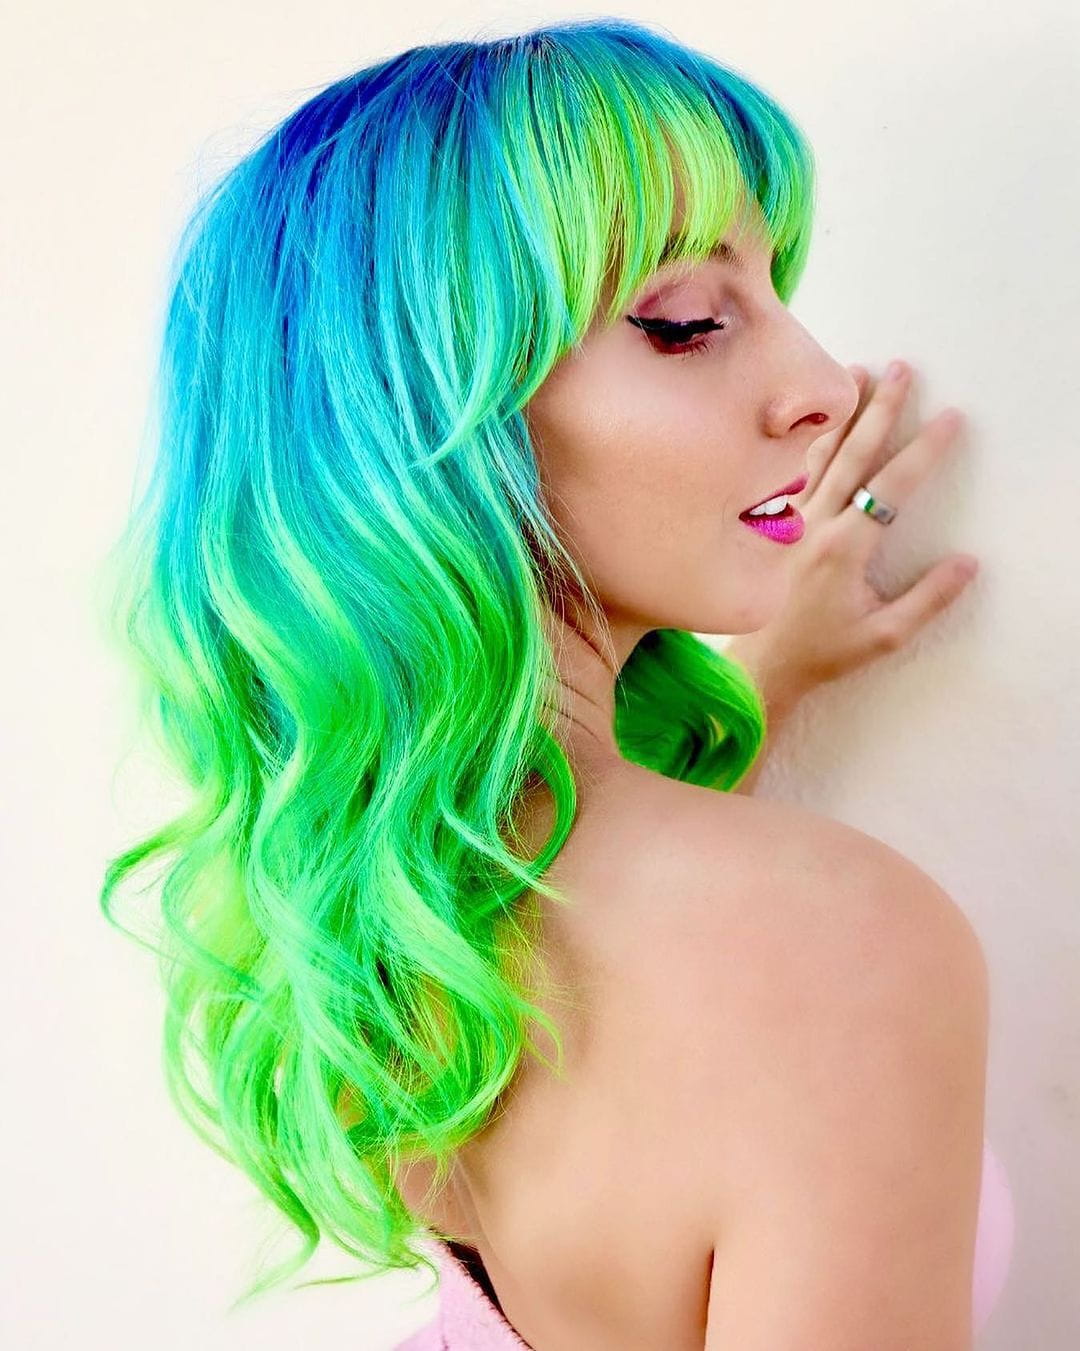 100+ Best Colorful Hair Ideas images 58